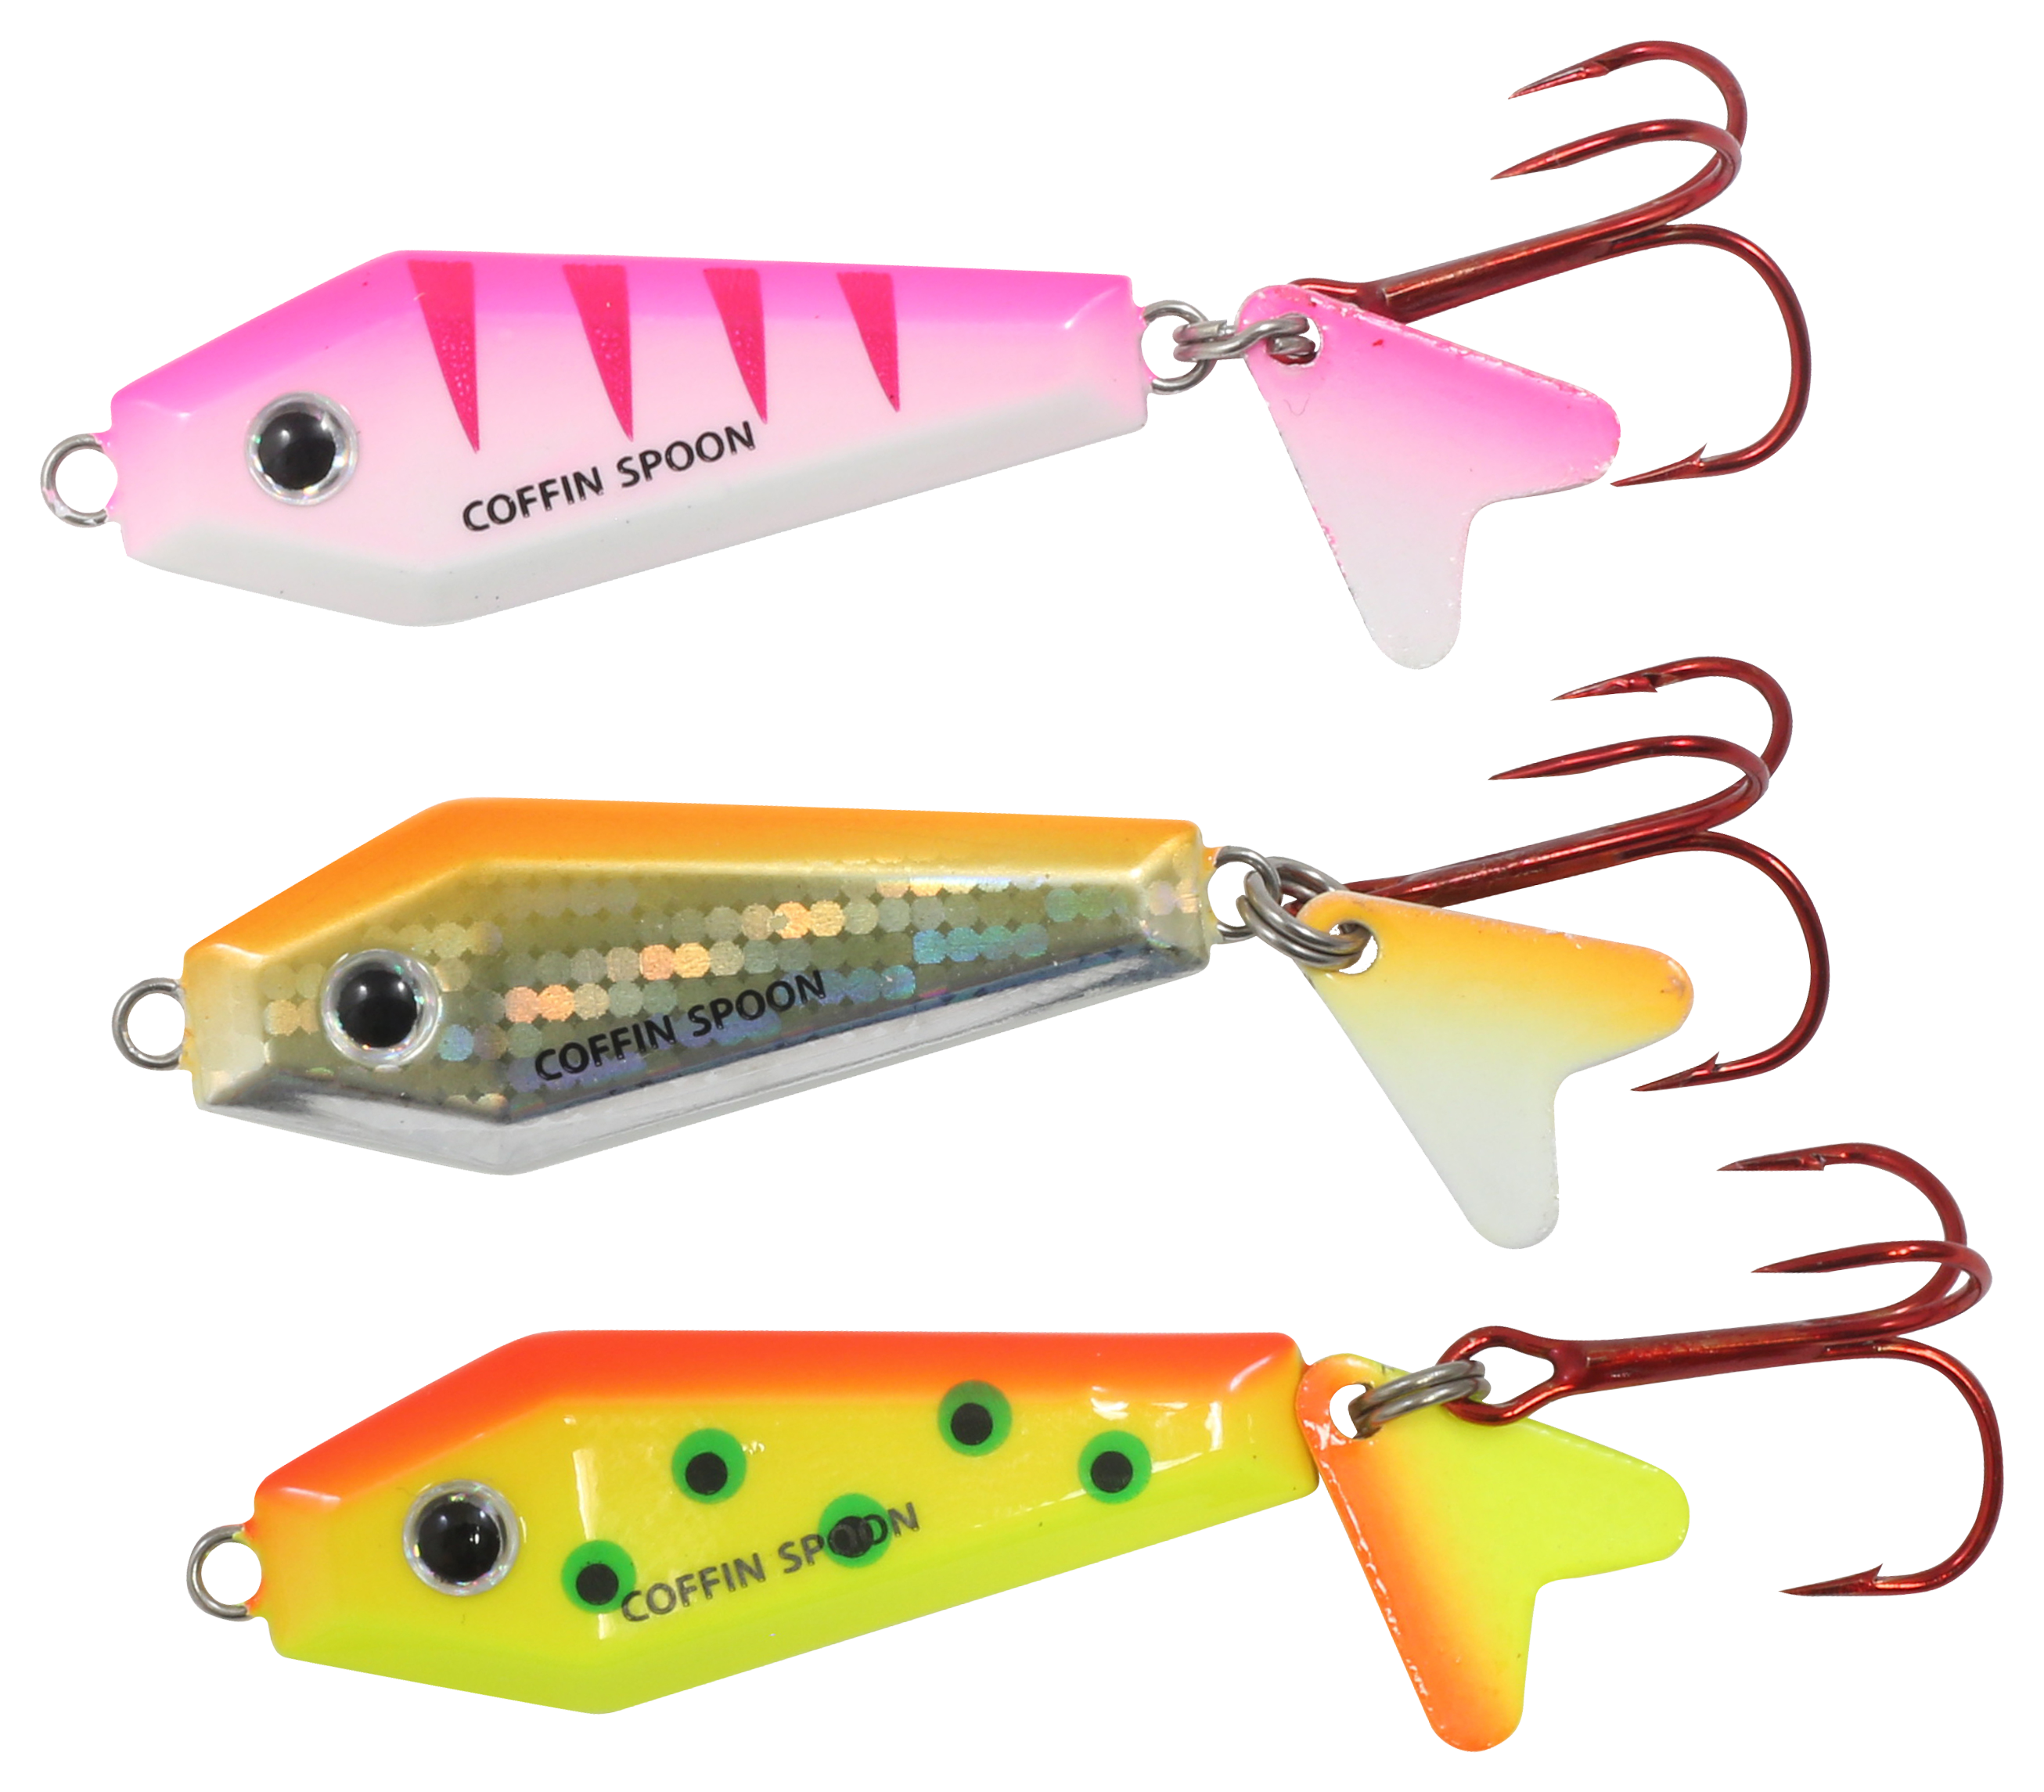  Northland Fishing Tackle Buck Shot Coffin Spoon Ice Fishing  Kit - 15 Spoons per Kit - Assorted Colors and Sizes with Tackle Box :  Sports & Outdoors